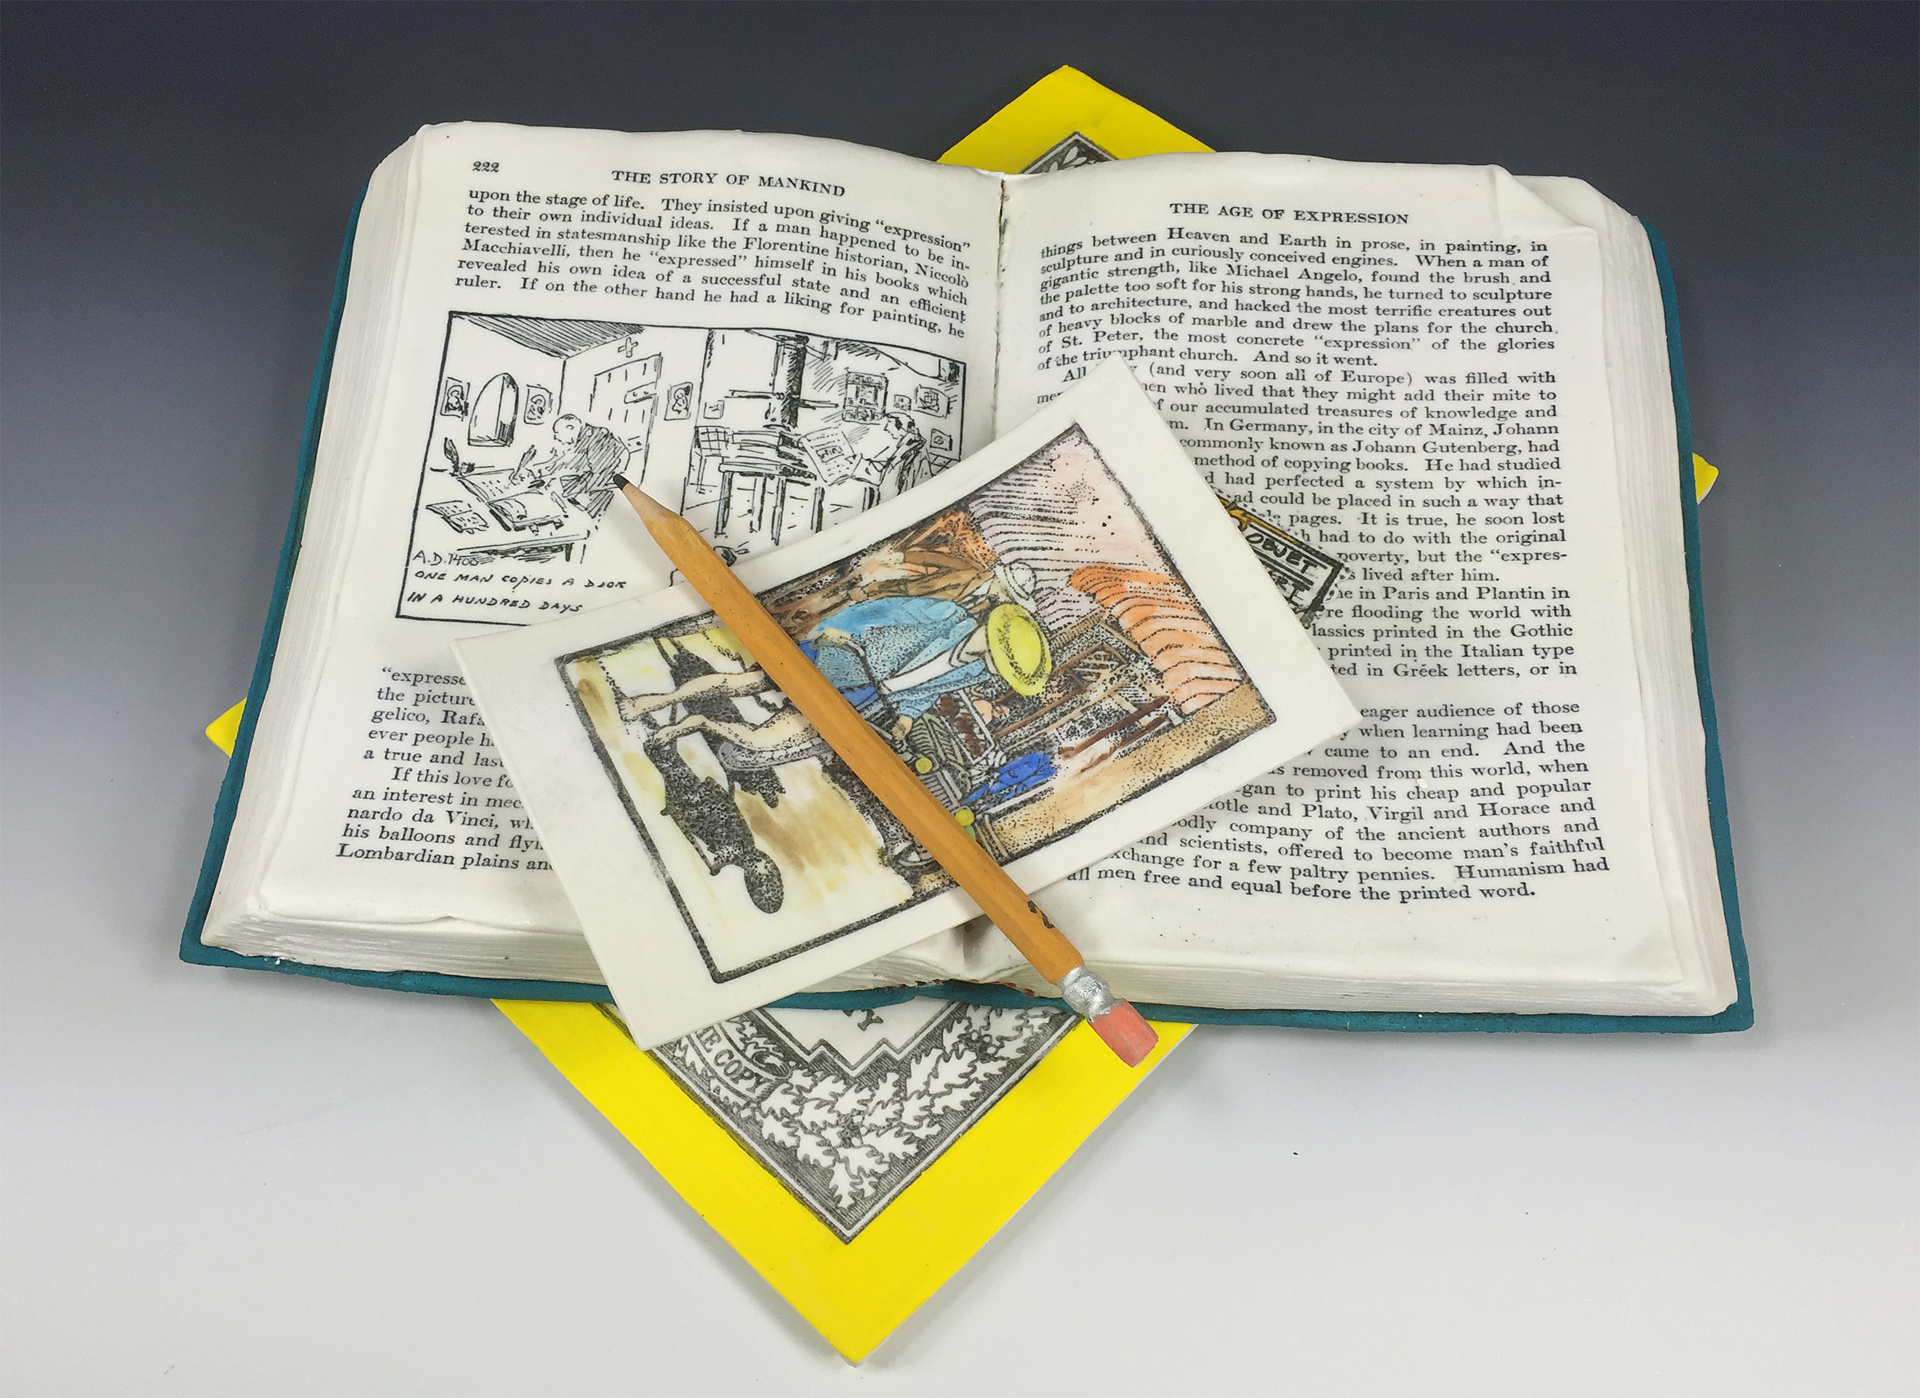 Suzanne Sidebottom used porcelain clay, underglazes and ceramic decals to create a realistic image of an open book, a pencil and other printed objects.